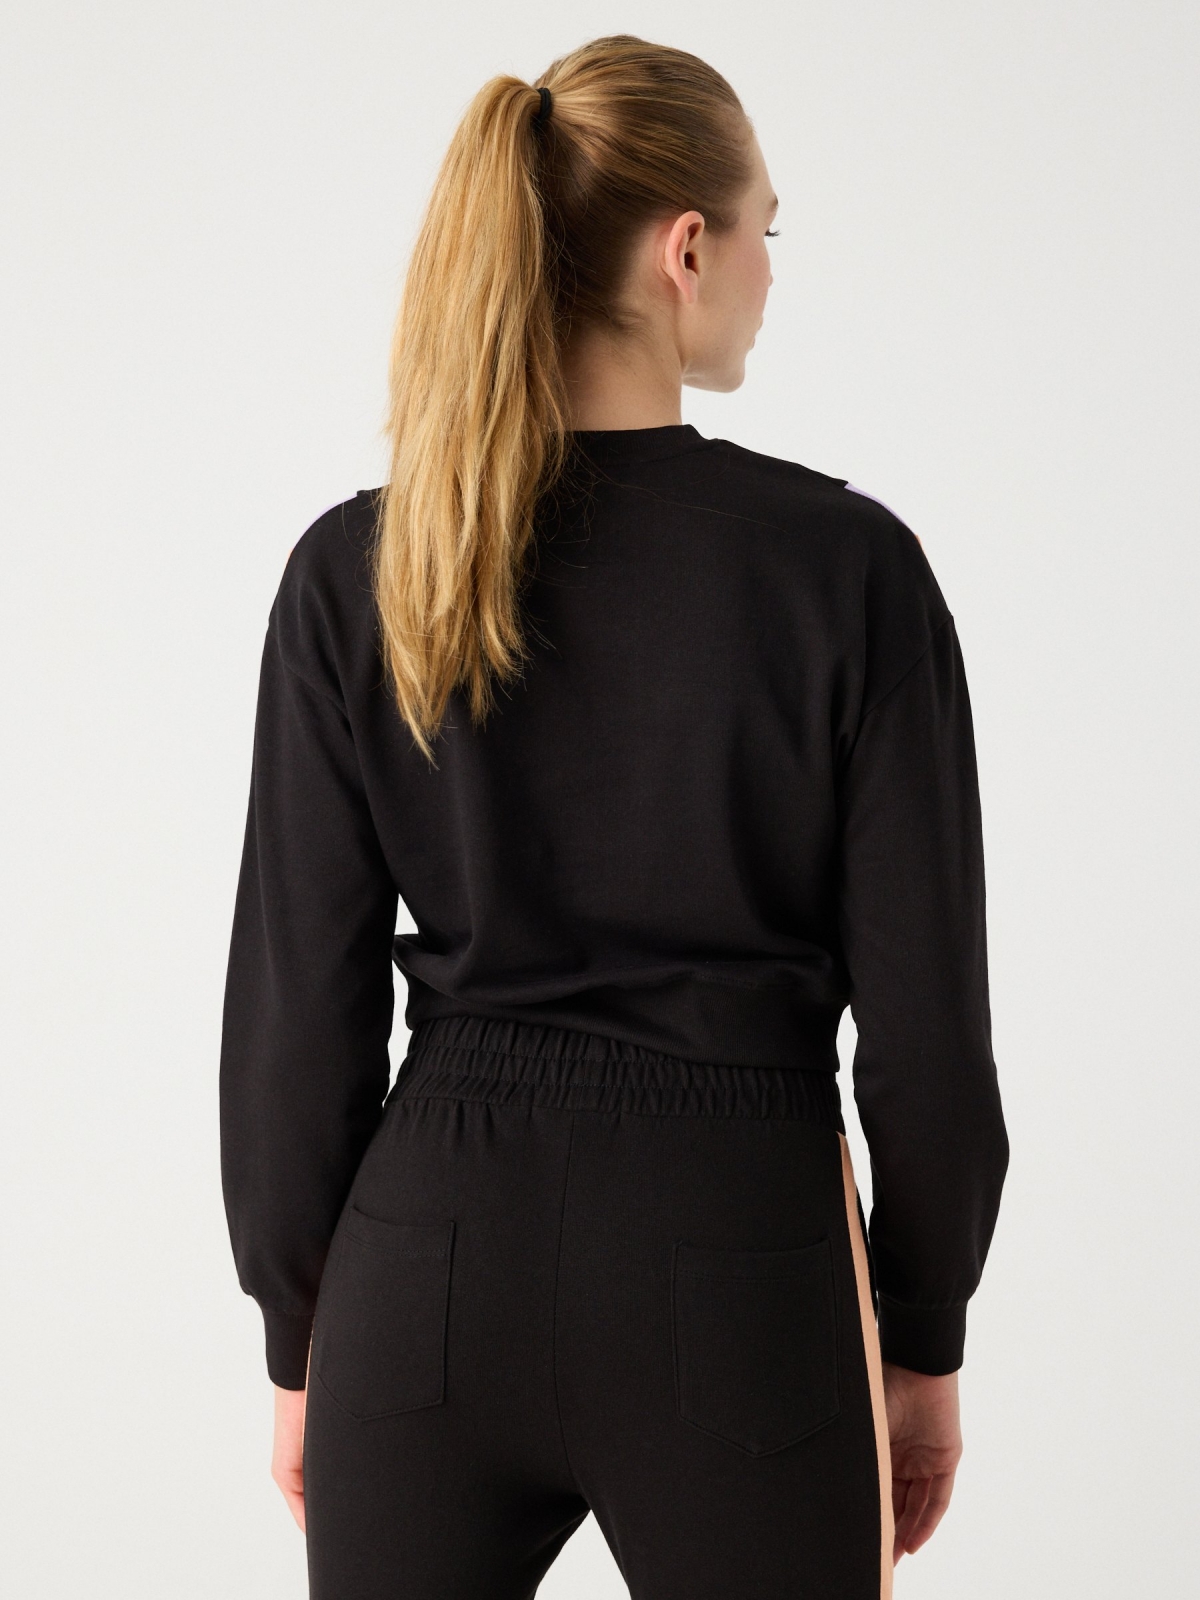 One Day cropped sweatshirt black middle back view